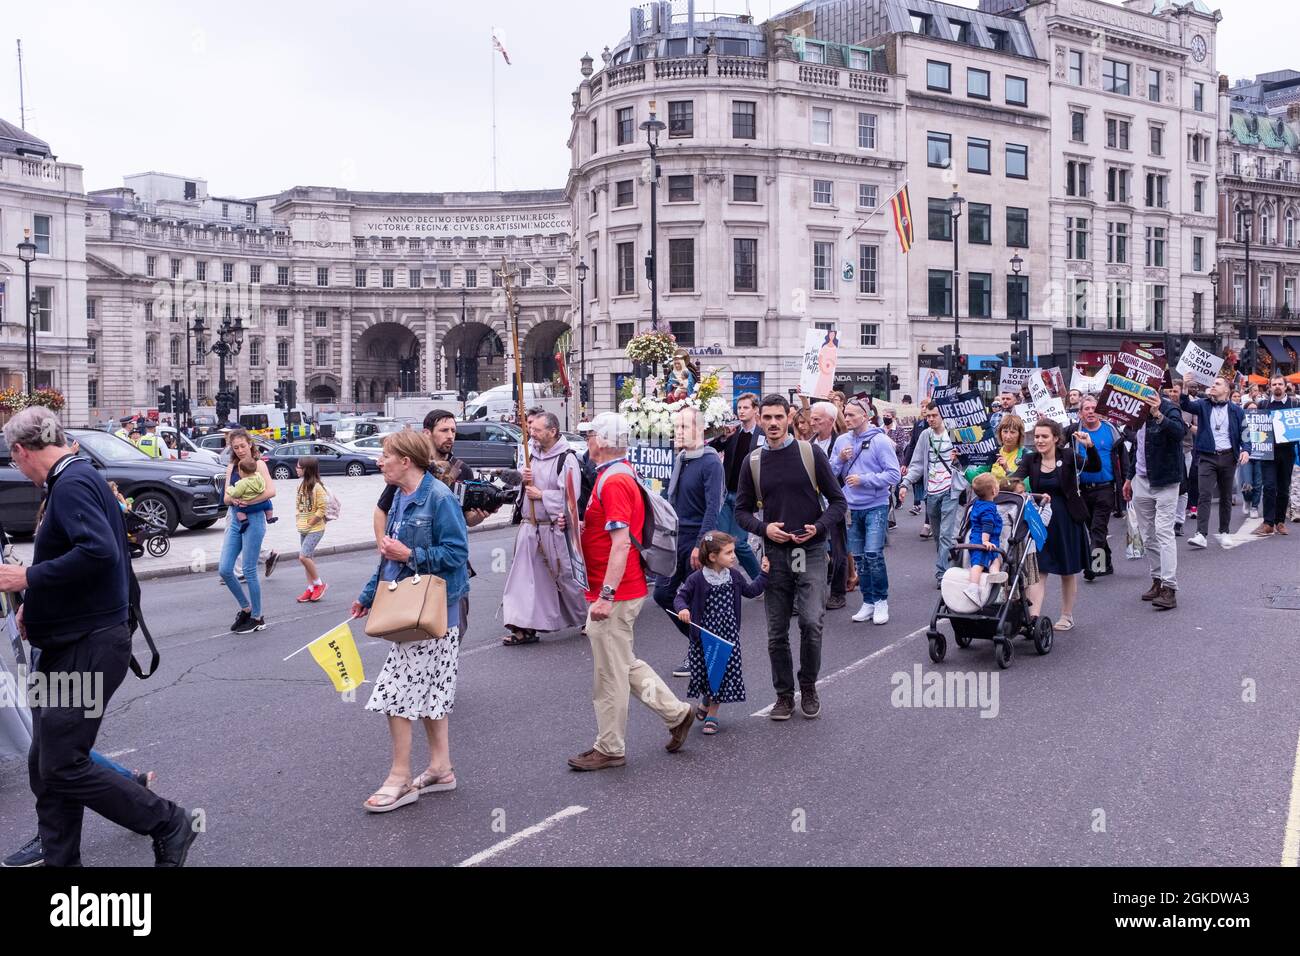 Demonstrators at the Extinction Rebellion ‘Tea Party’ rally, September 4th 2020 in Central London. The march was combined with a pro-life demonstration Stock Photo